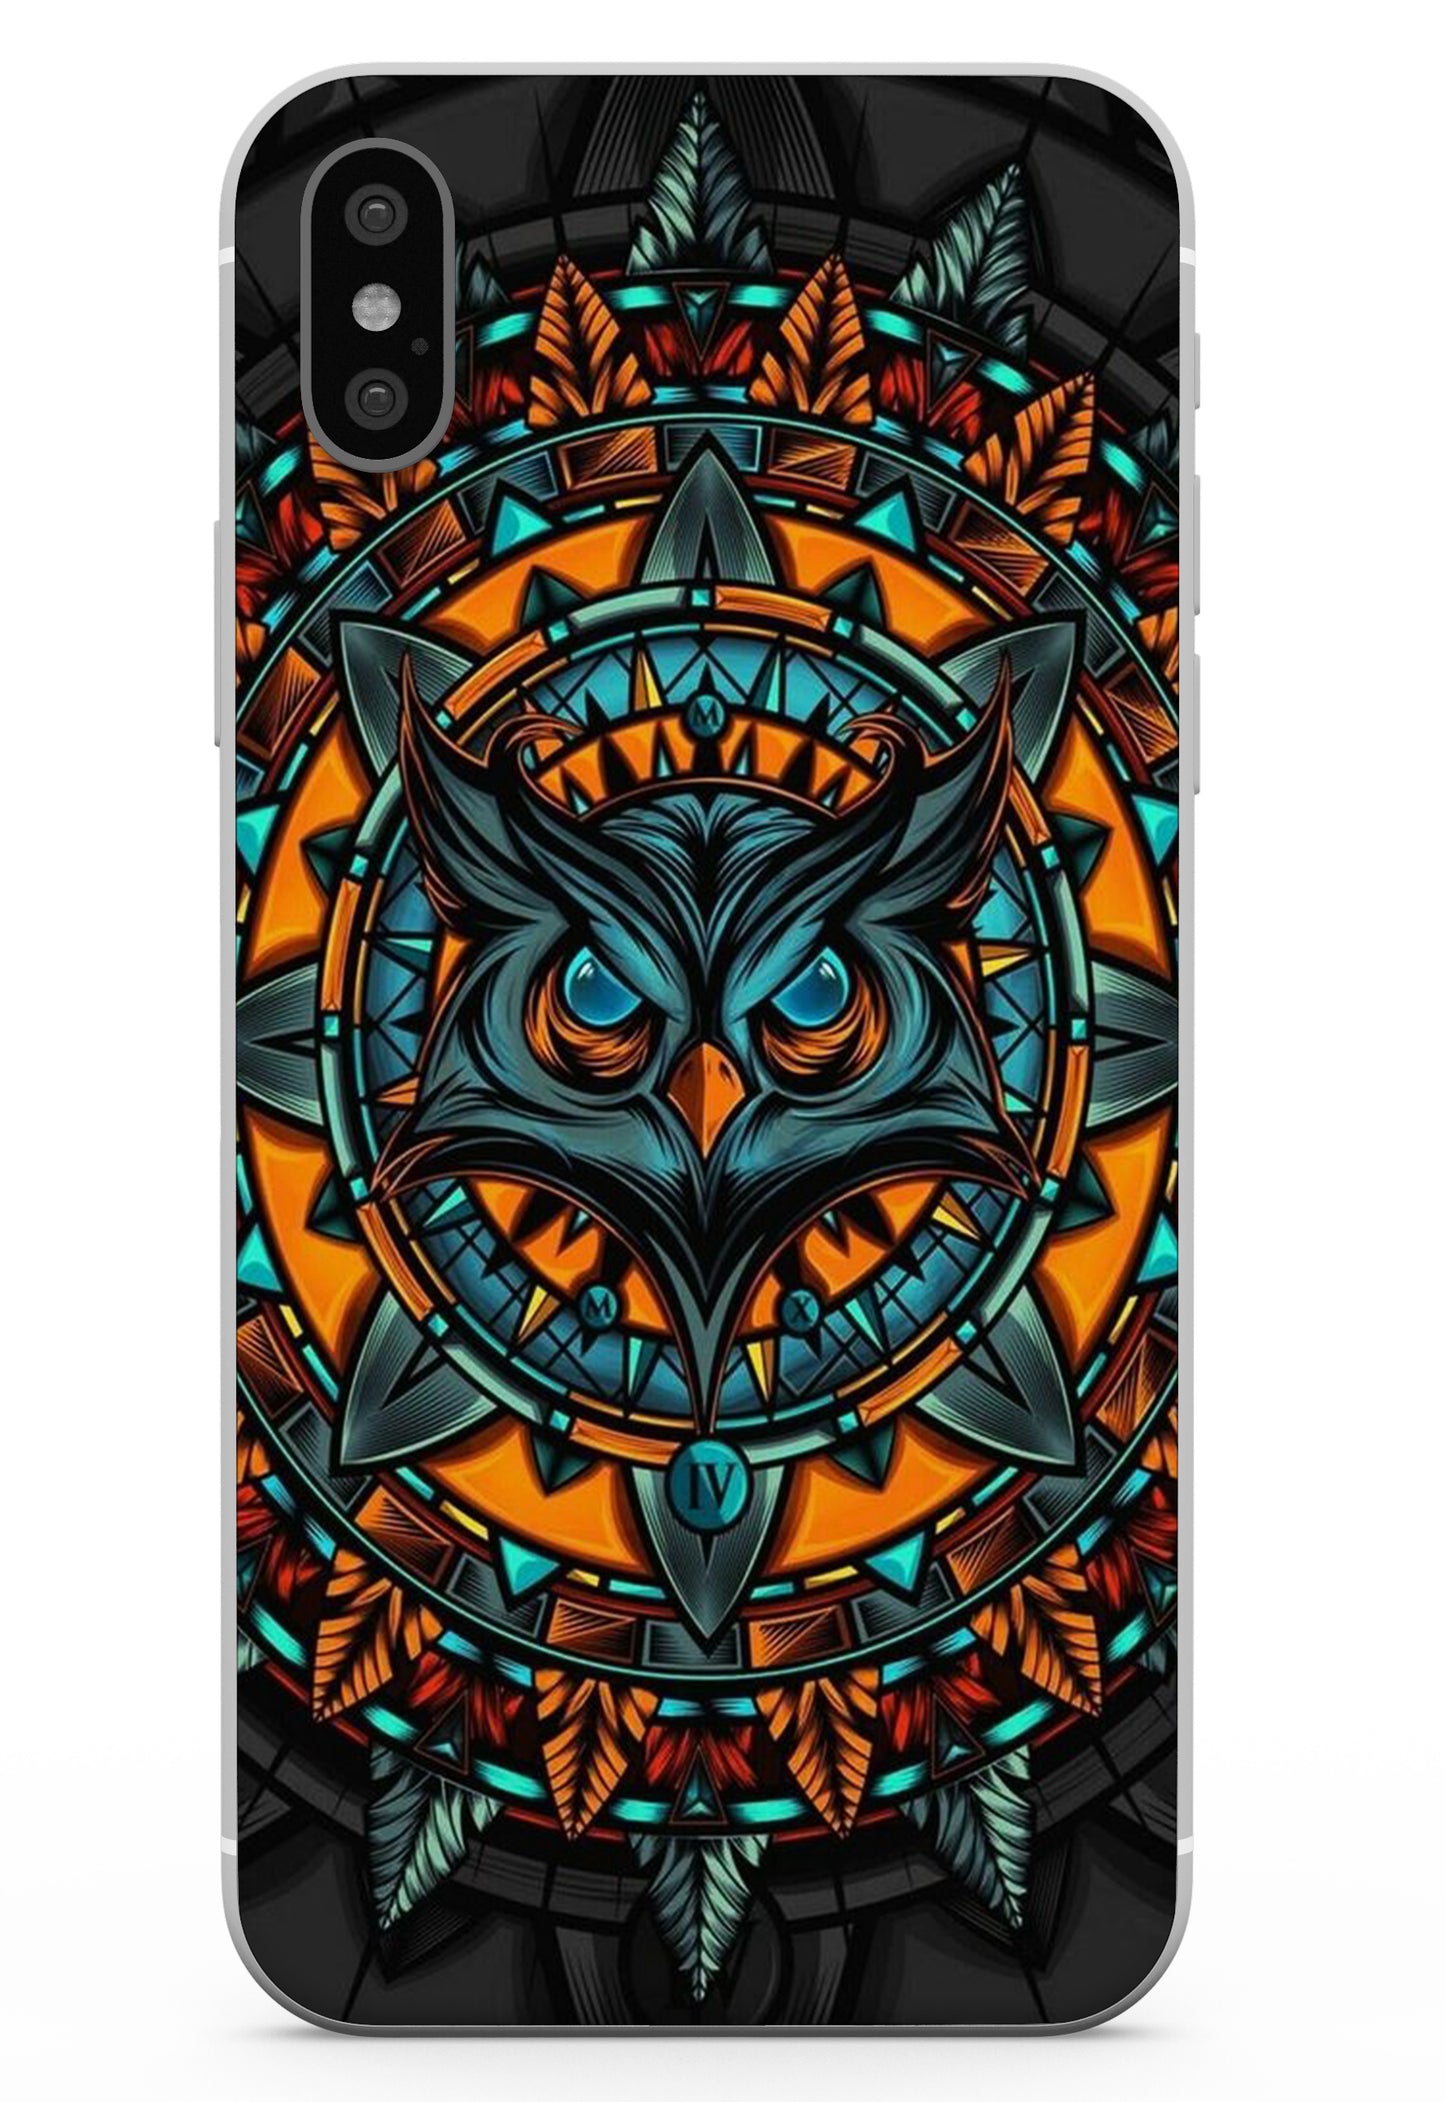 Mighty Owl Mobile 6D Skin